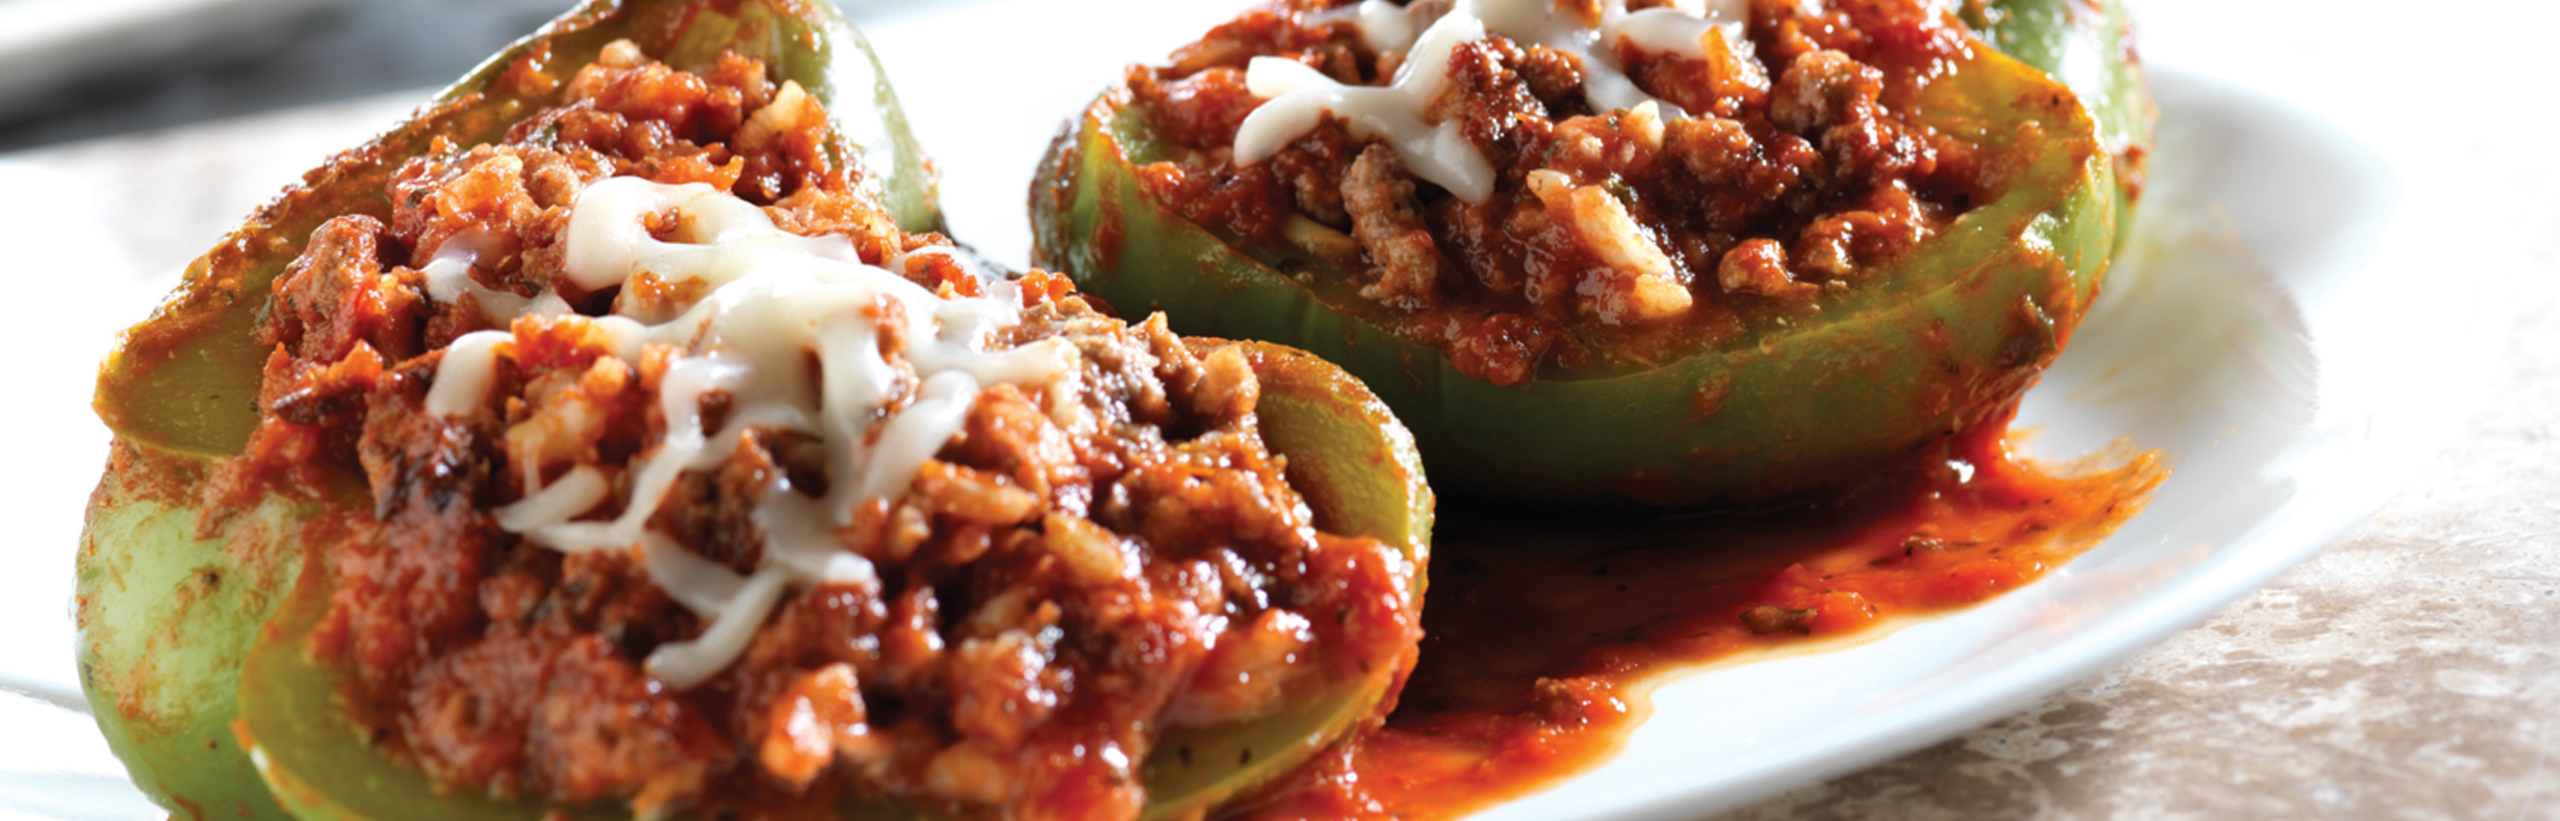 Good-For-You Stuffed Peppers